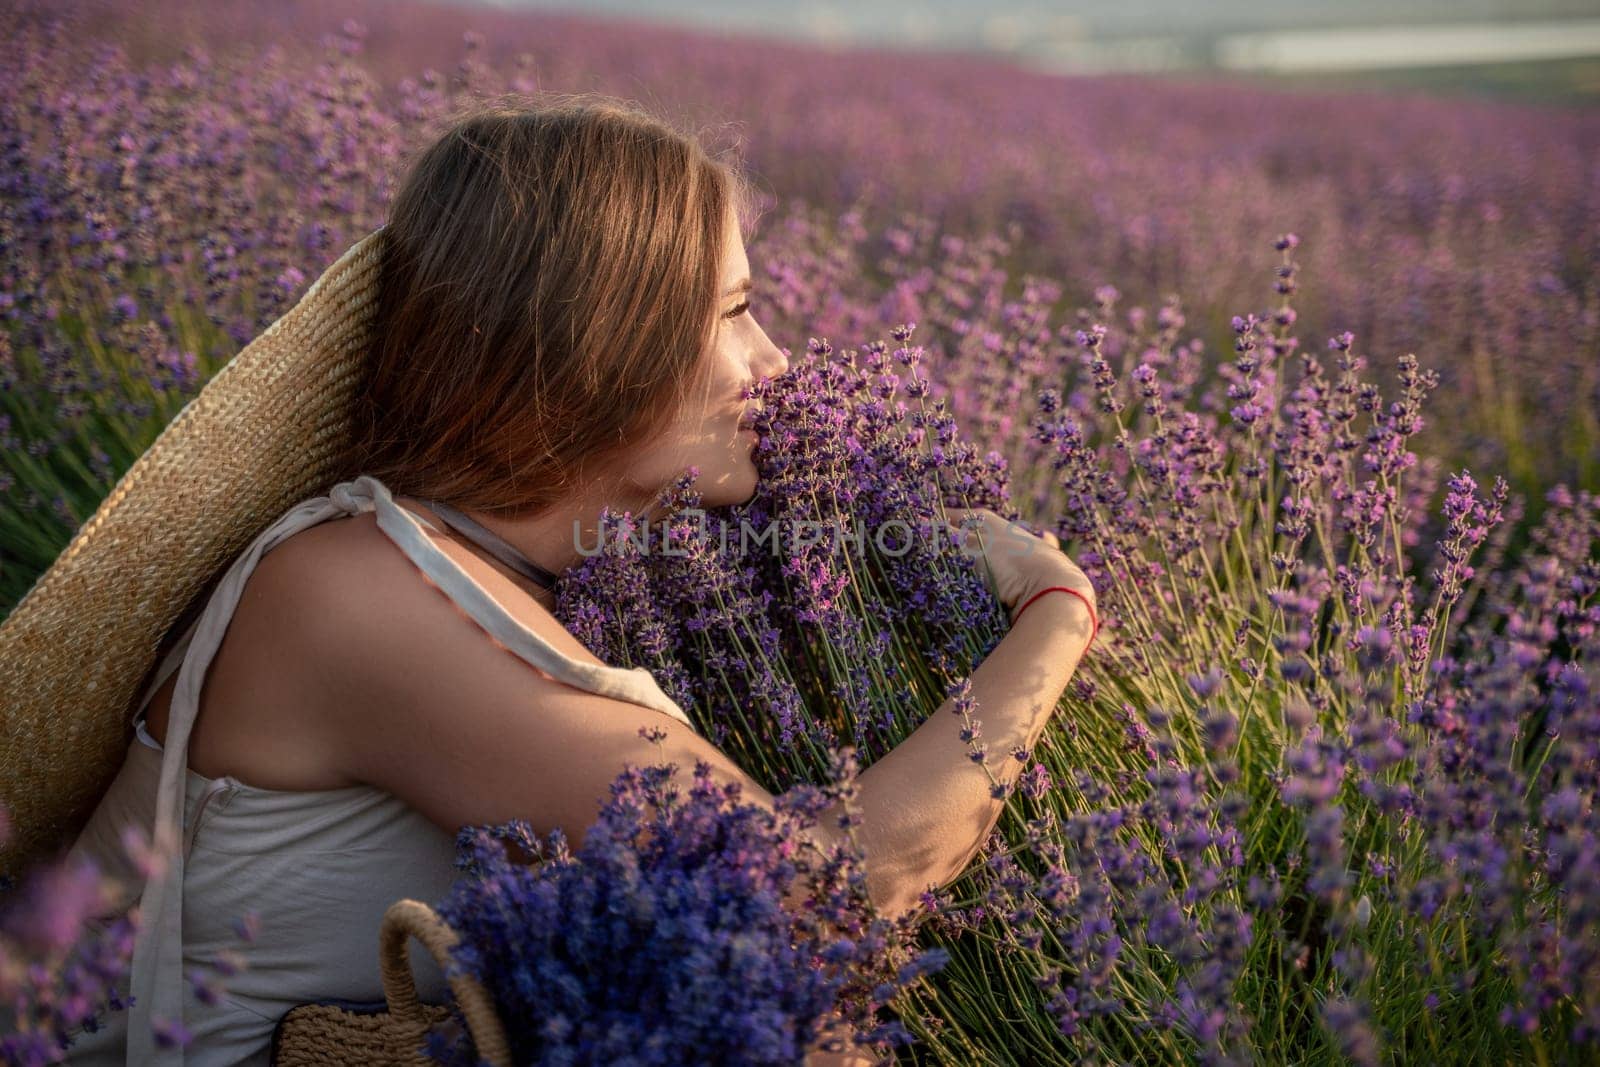 A woman is sitting in a field of lavender flowers. She is wearing a straw hat and holding a basket of flowers. The scene is peaceful and serene, with the woman enjoying the beauty of the flowers. by Matiunina